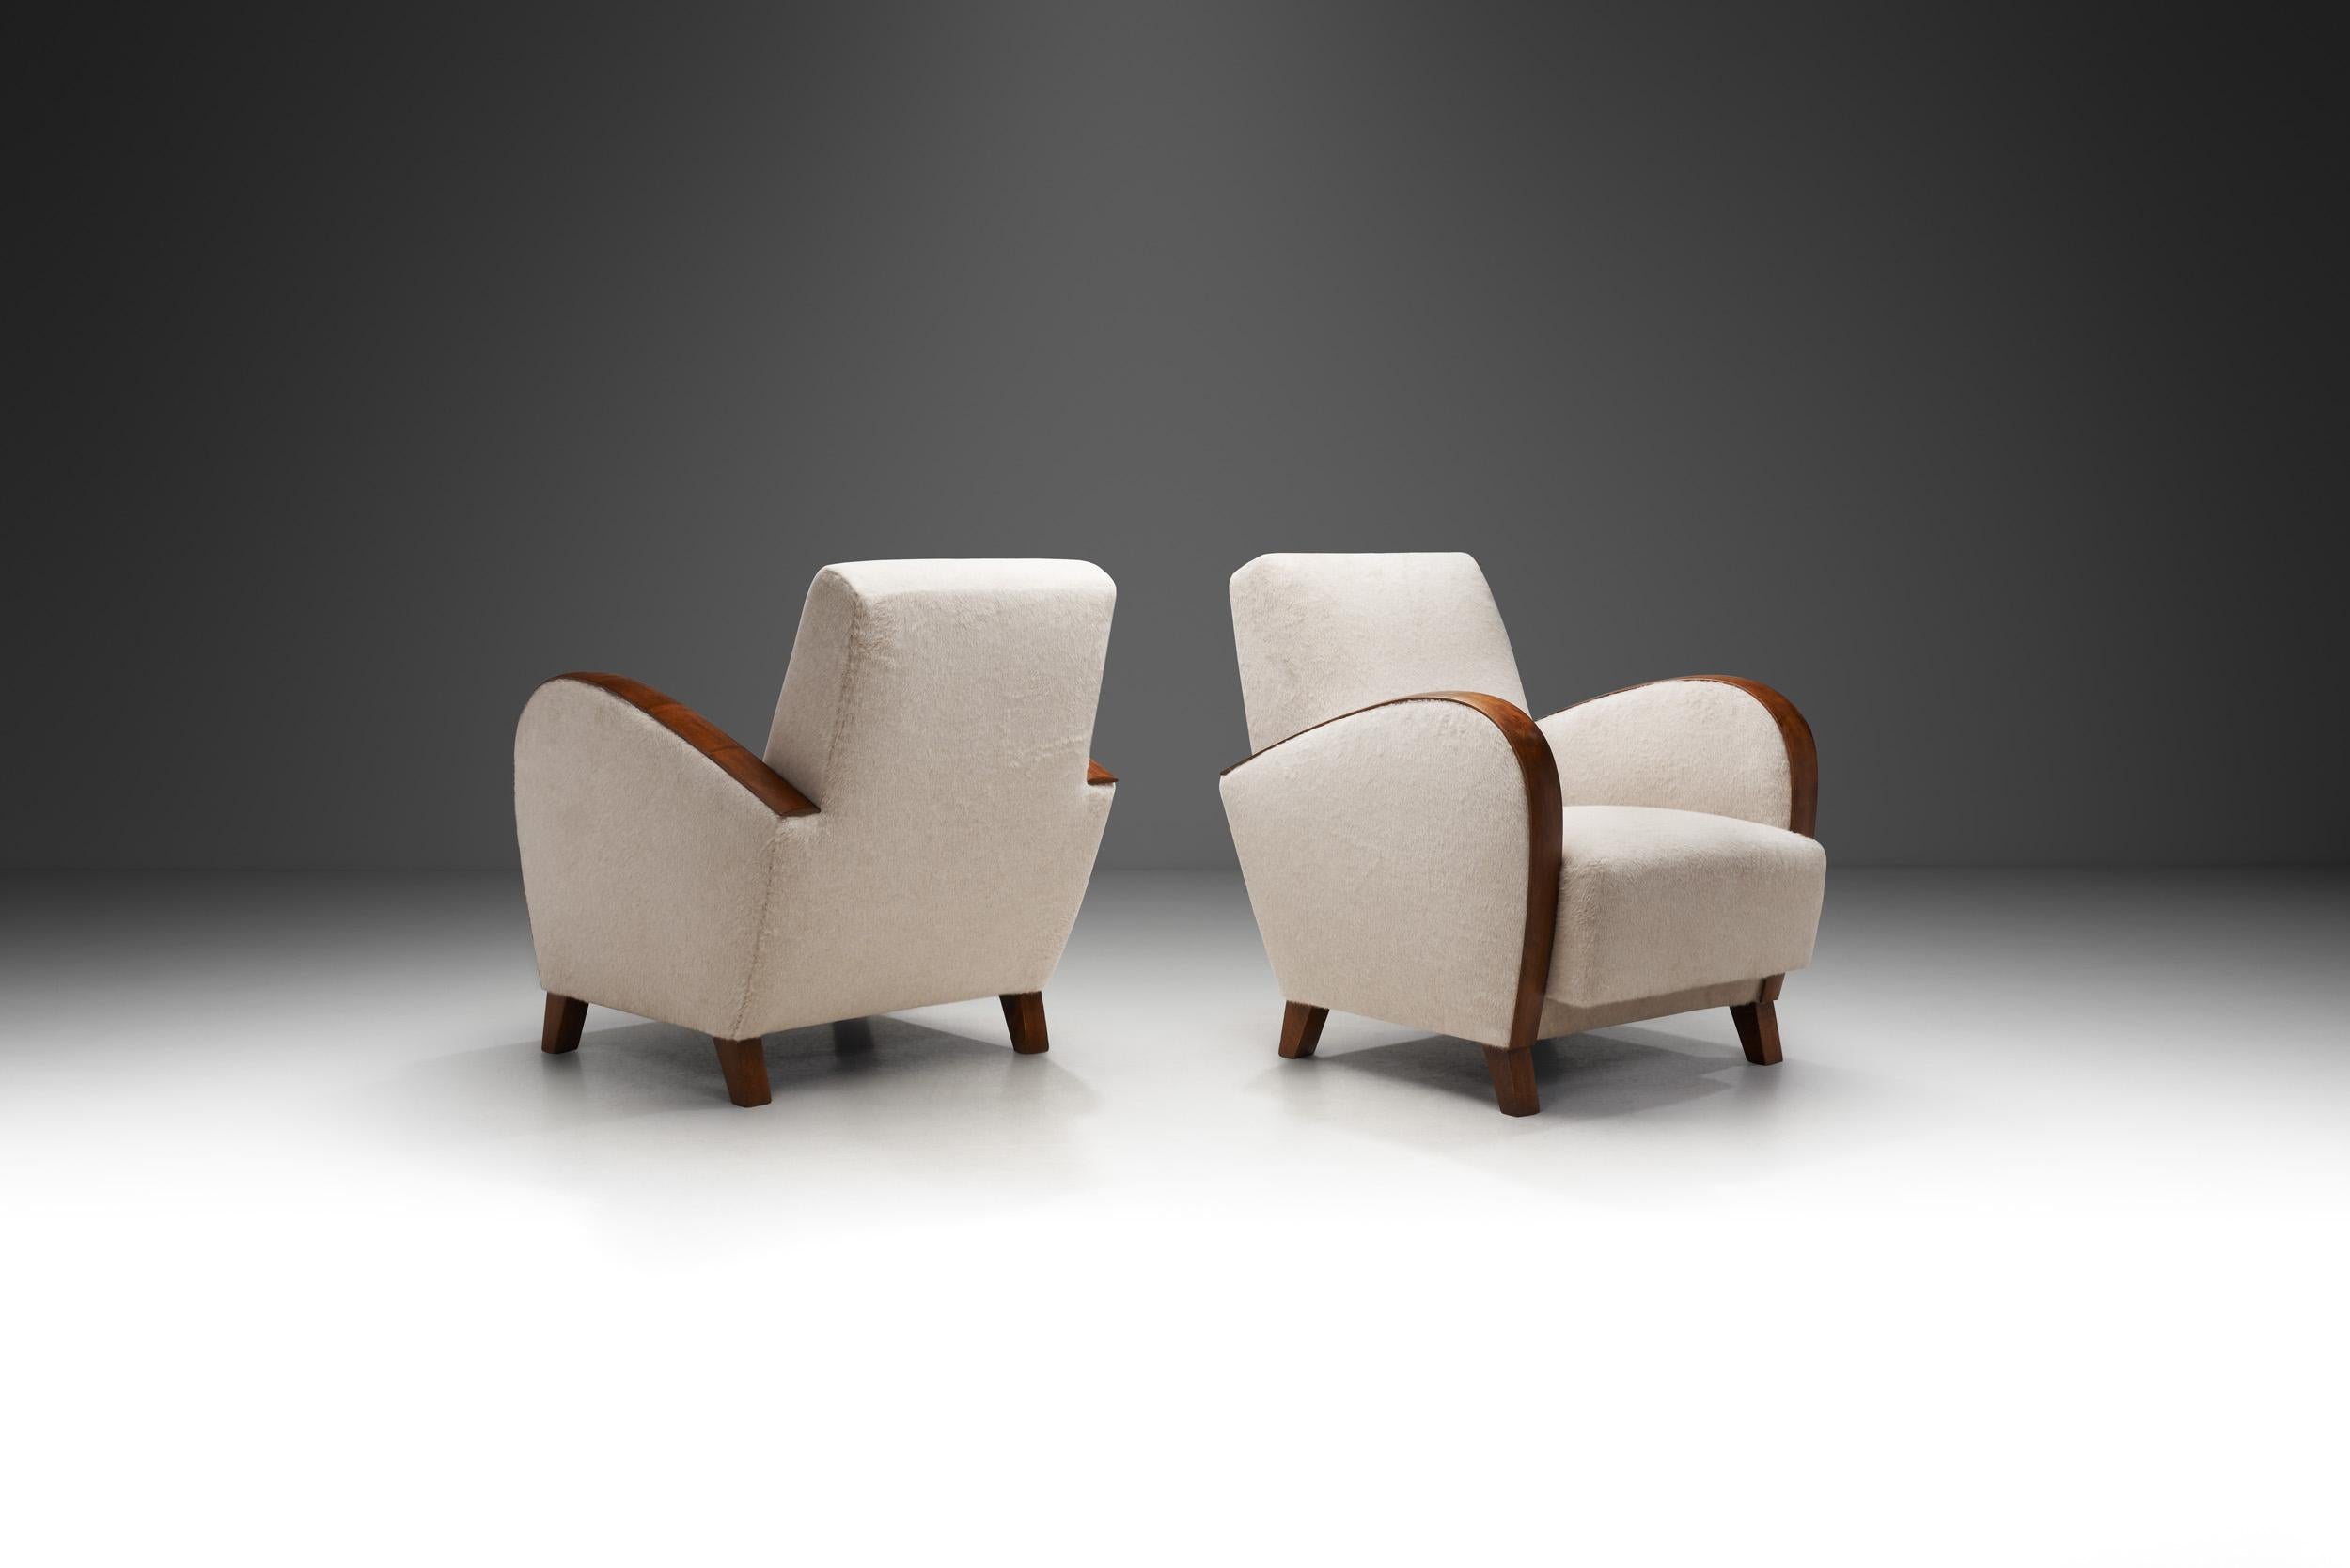 Swedish A Pair of Reupholstered Funkis Armchairs by Axel Einar Hjorth, Sweden 1930s.